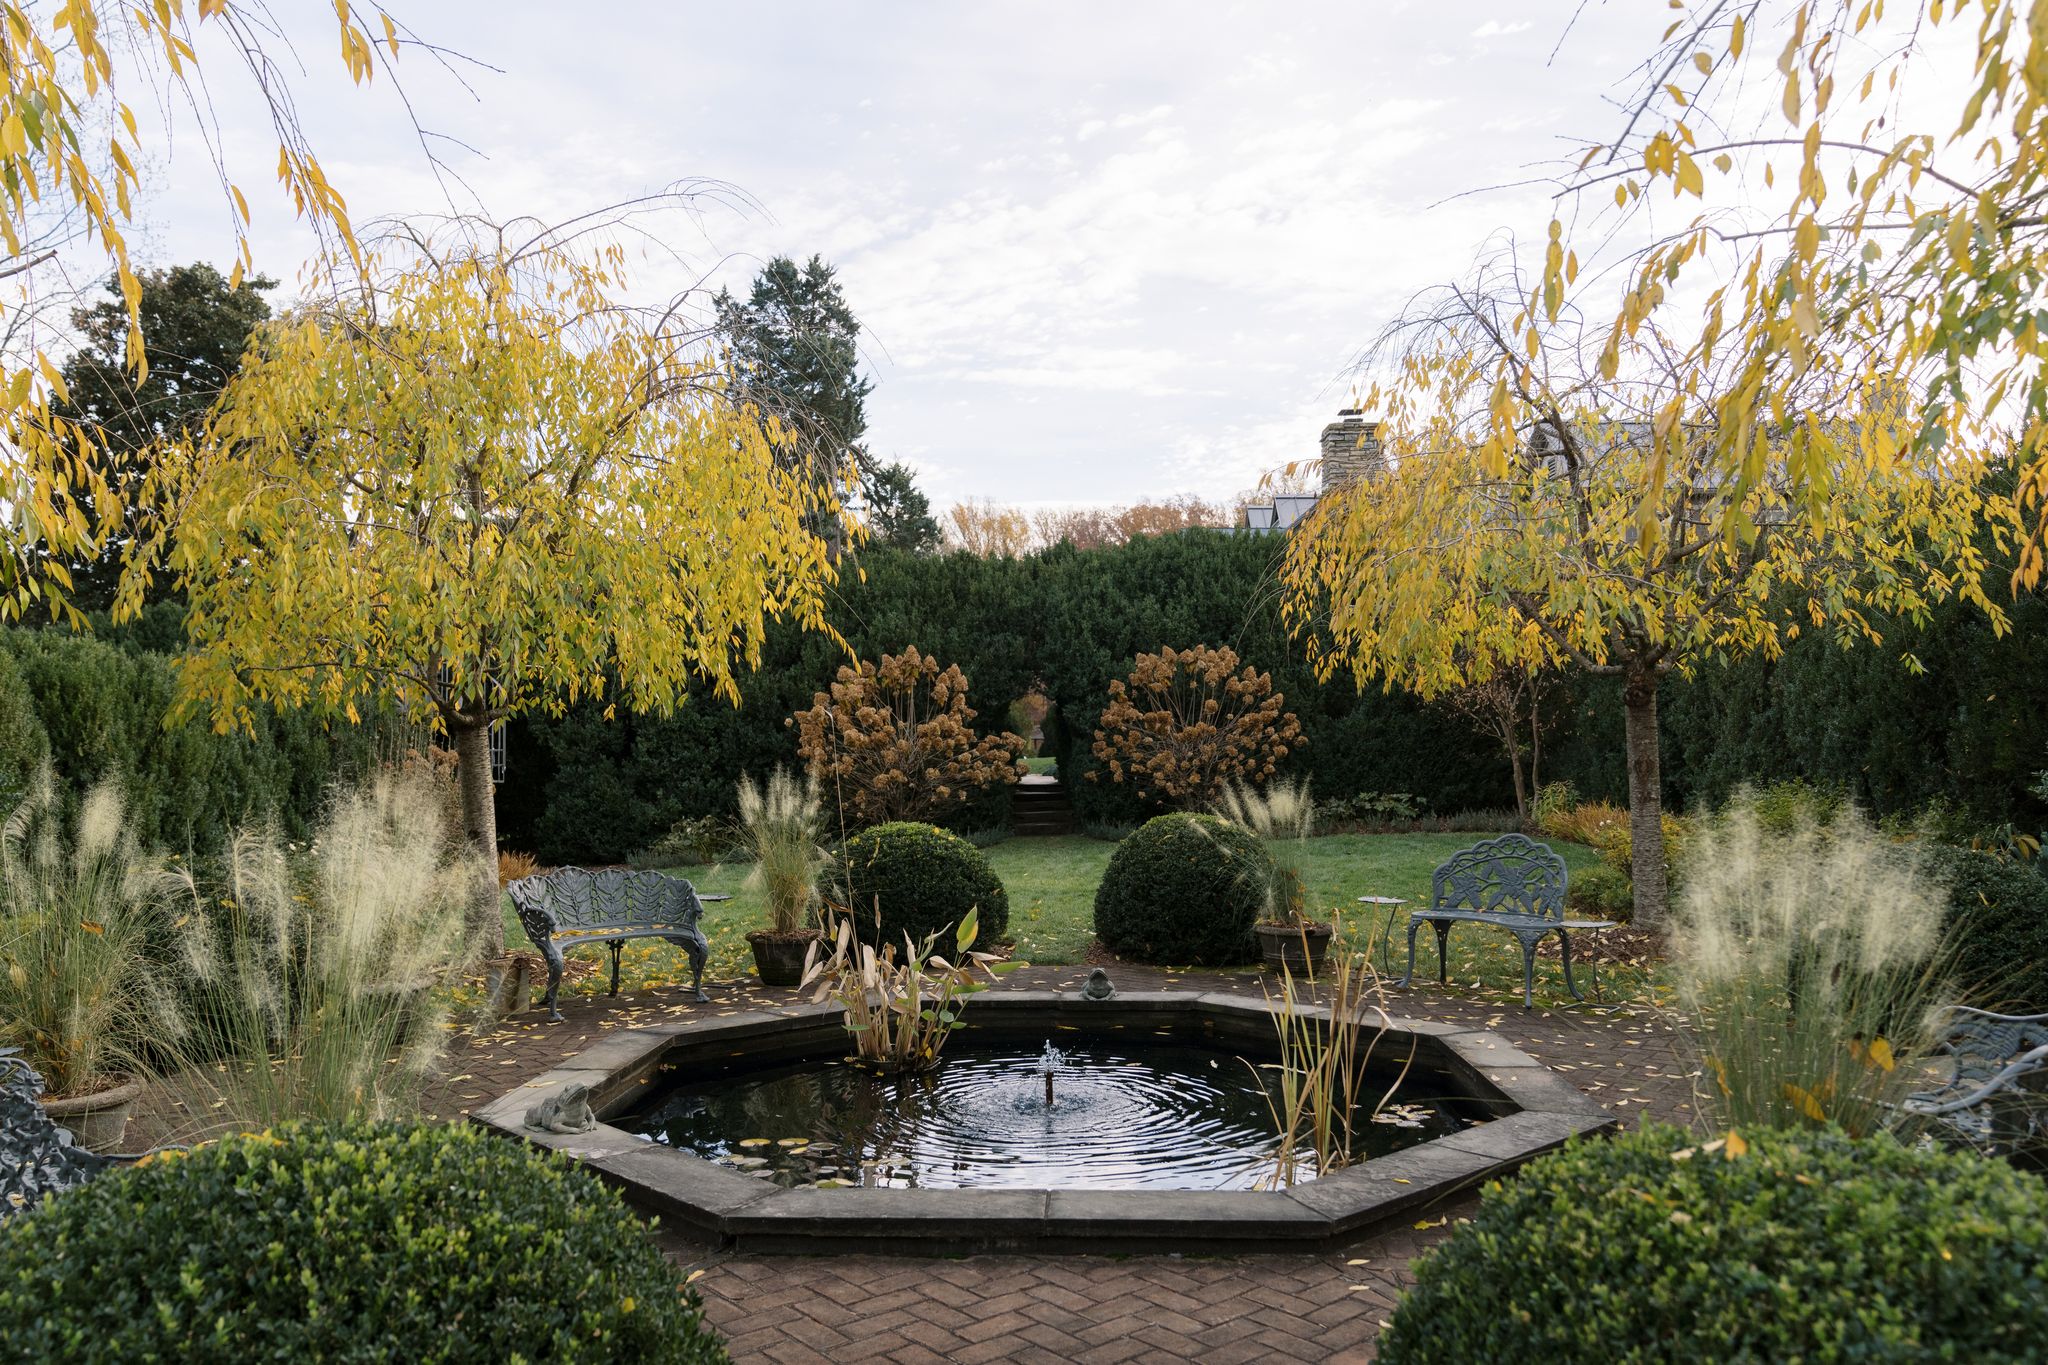 A fountain in a garden with yellow trees and bushes